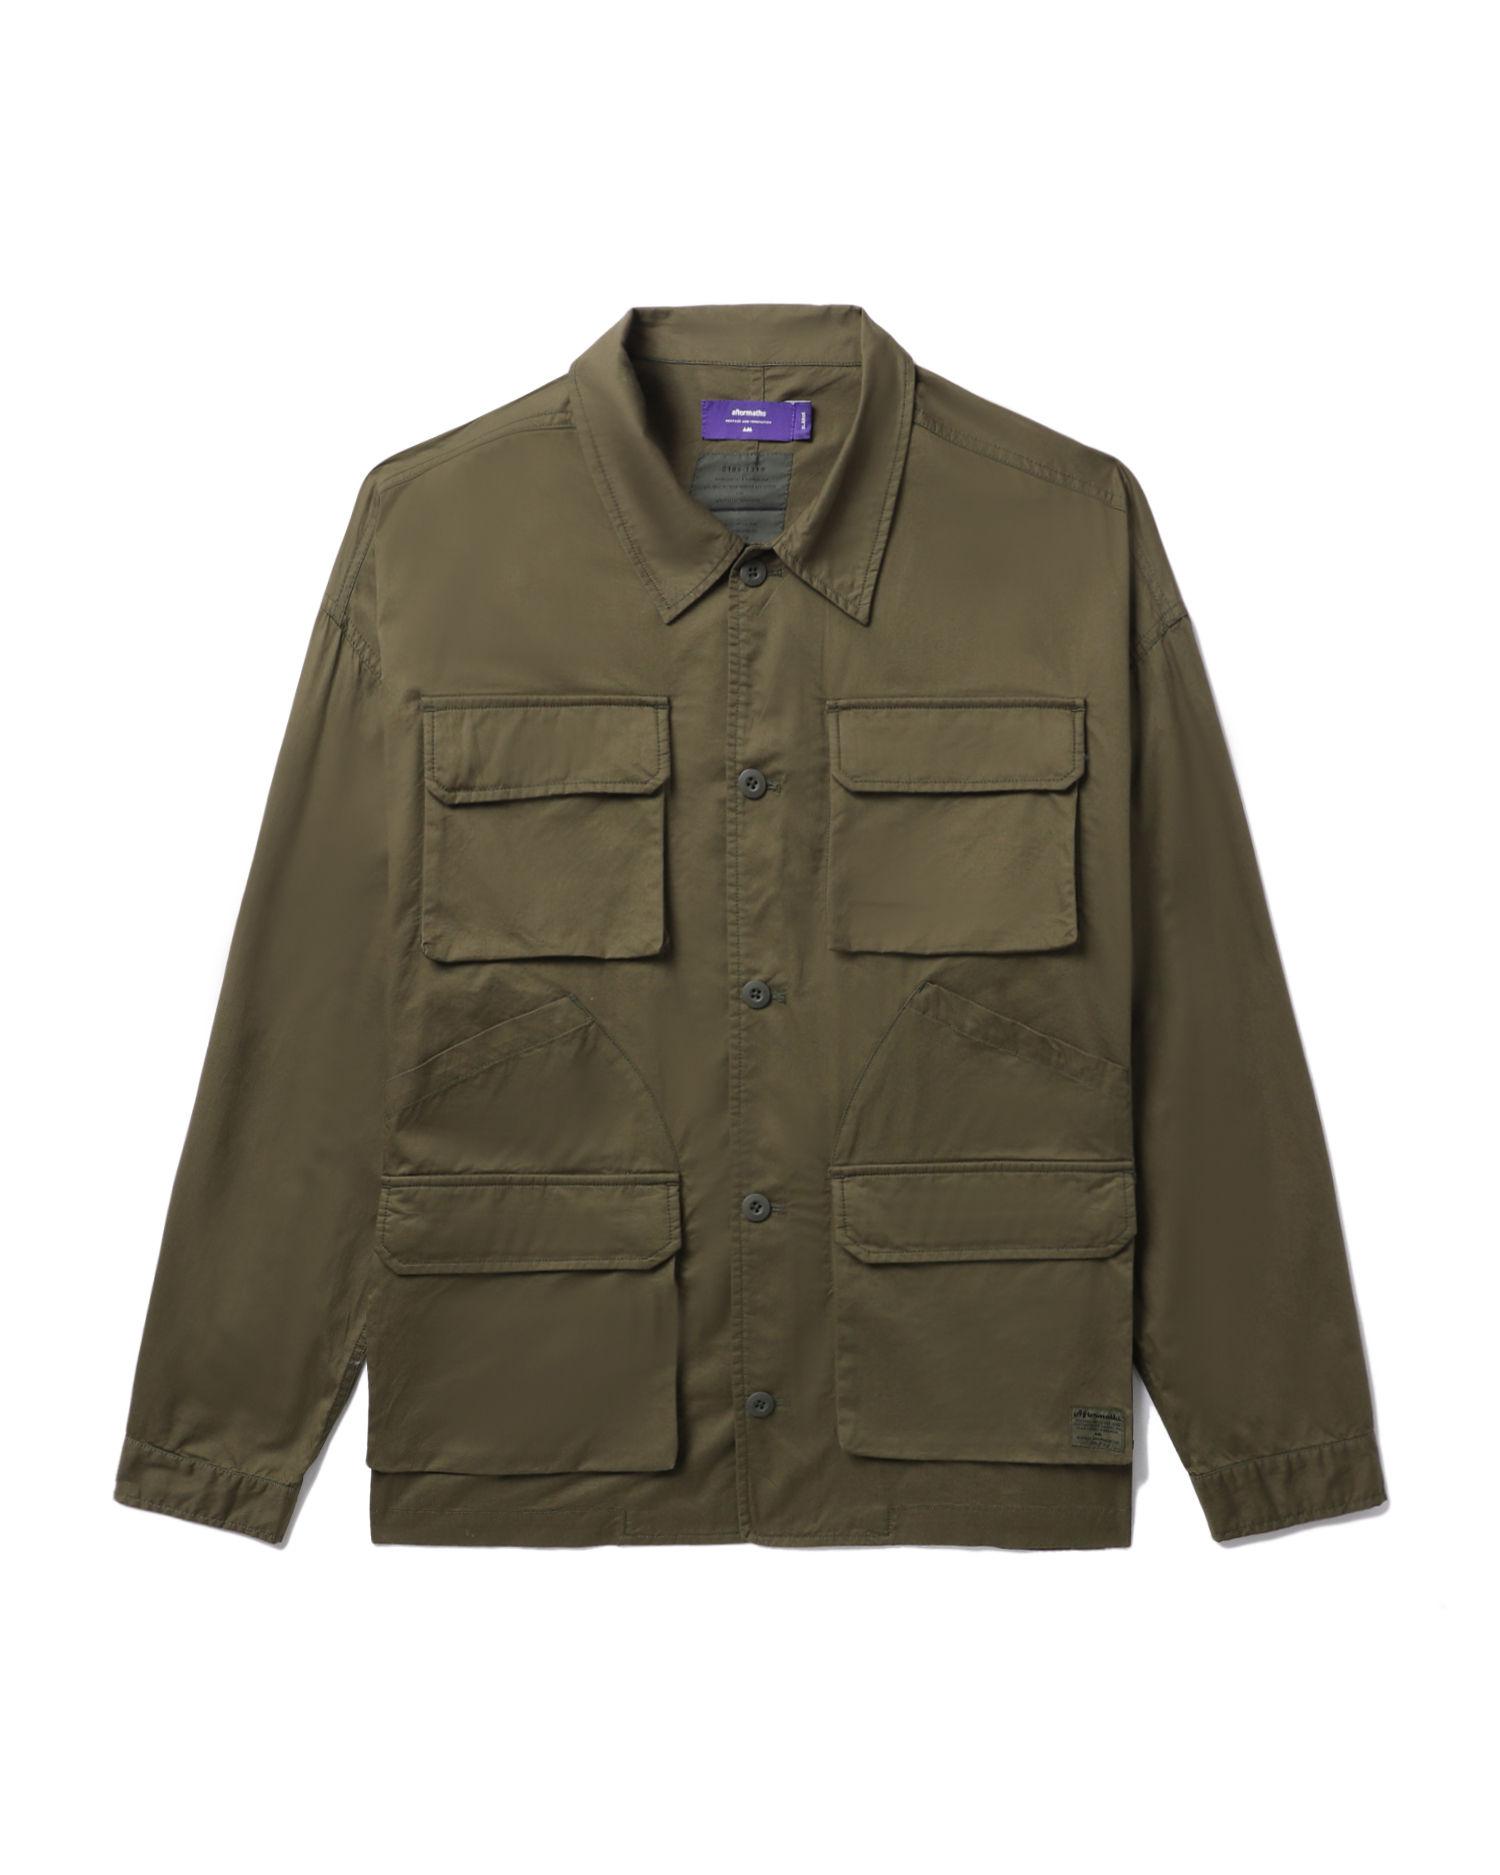 Multipocket workwear relaxed shirt by AFTERMATHS